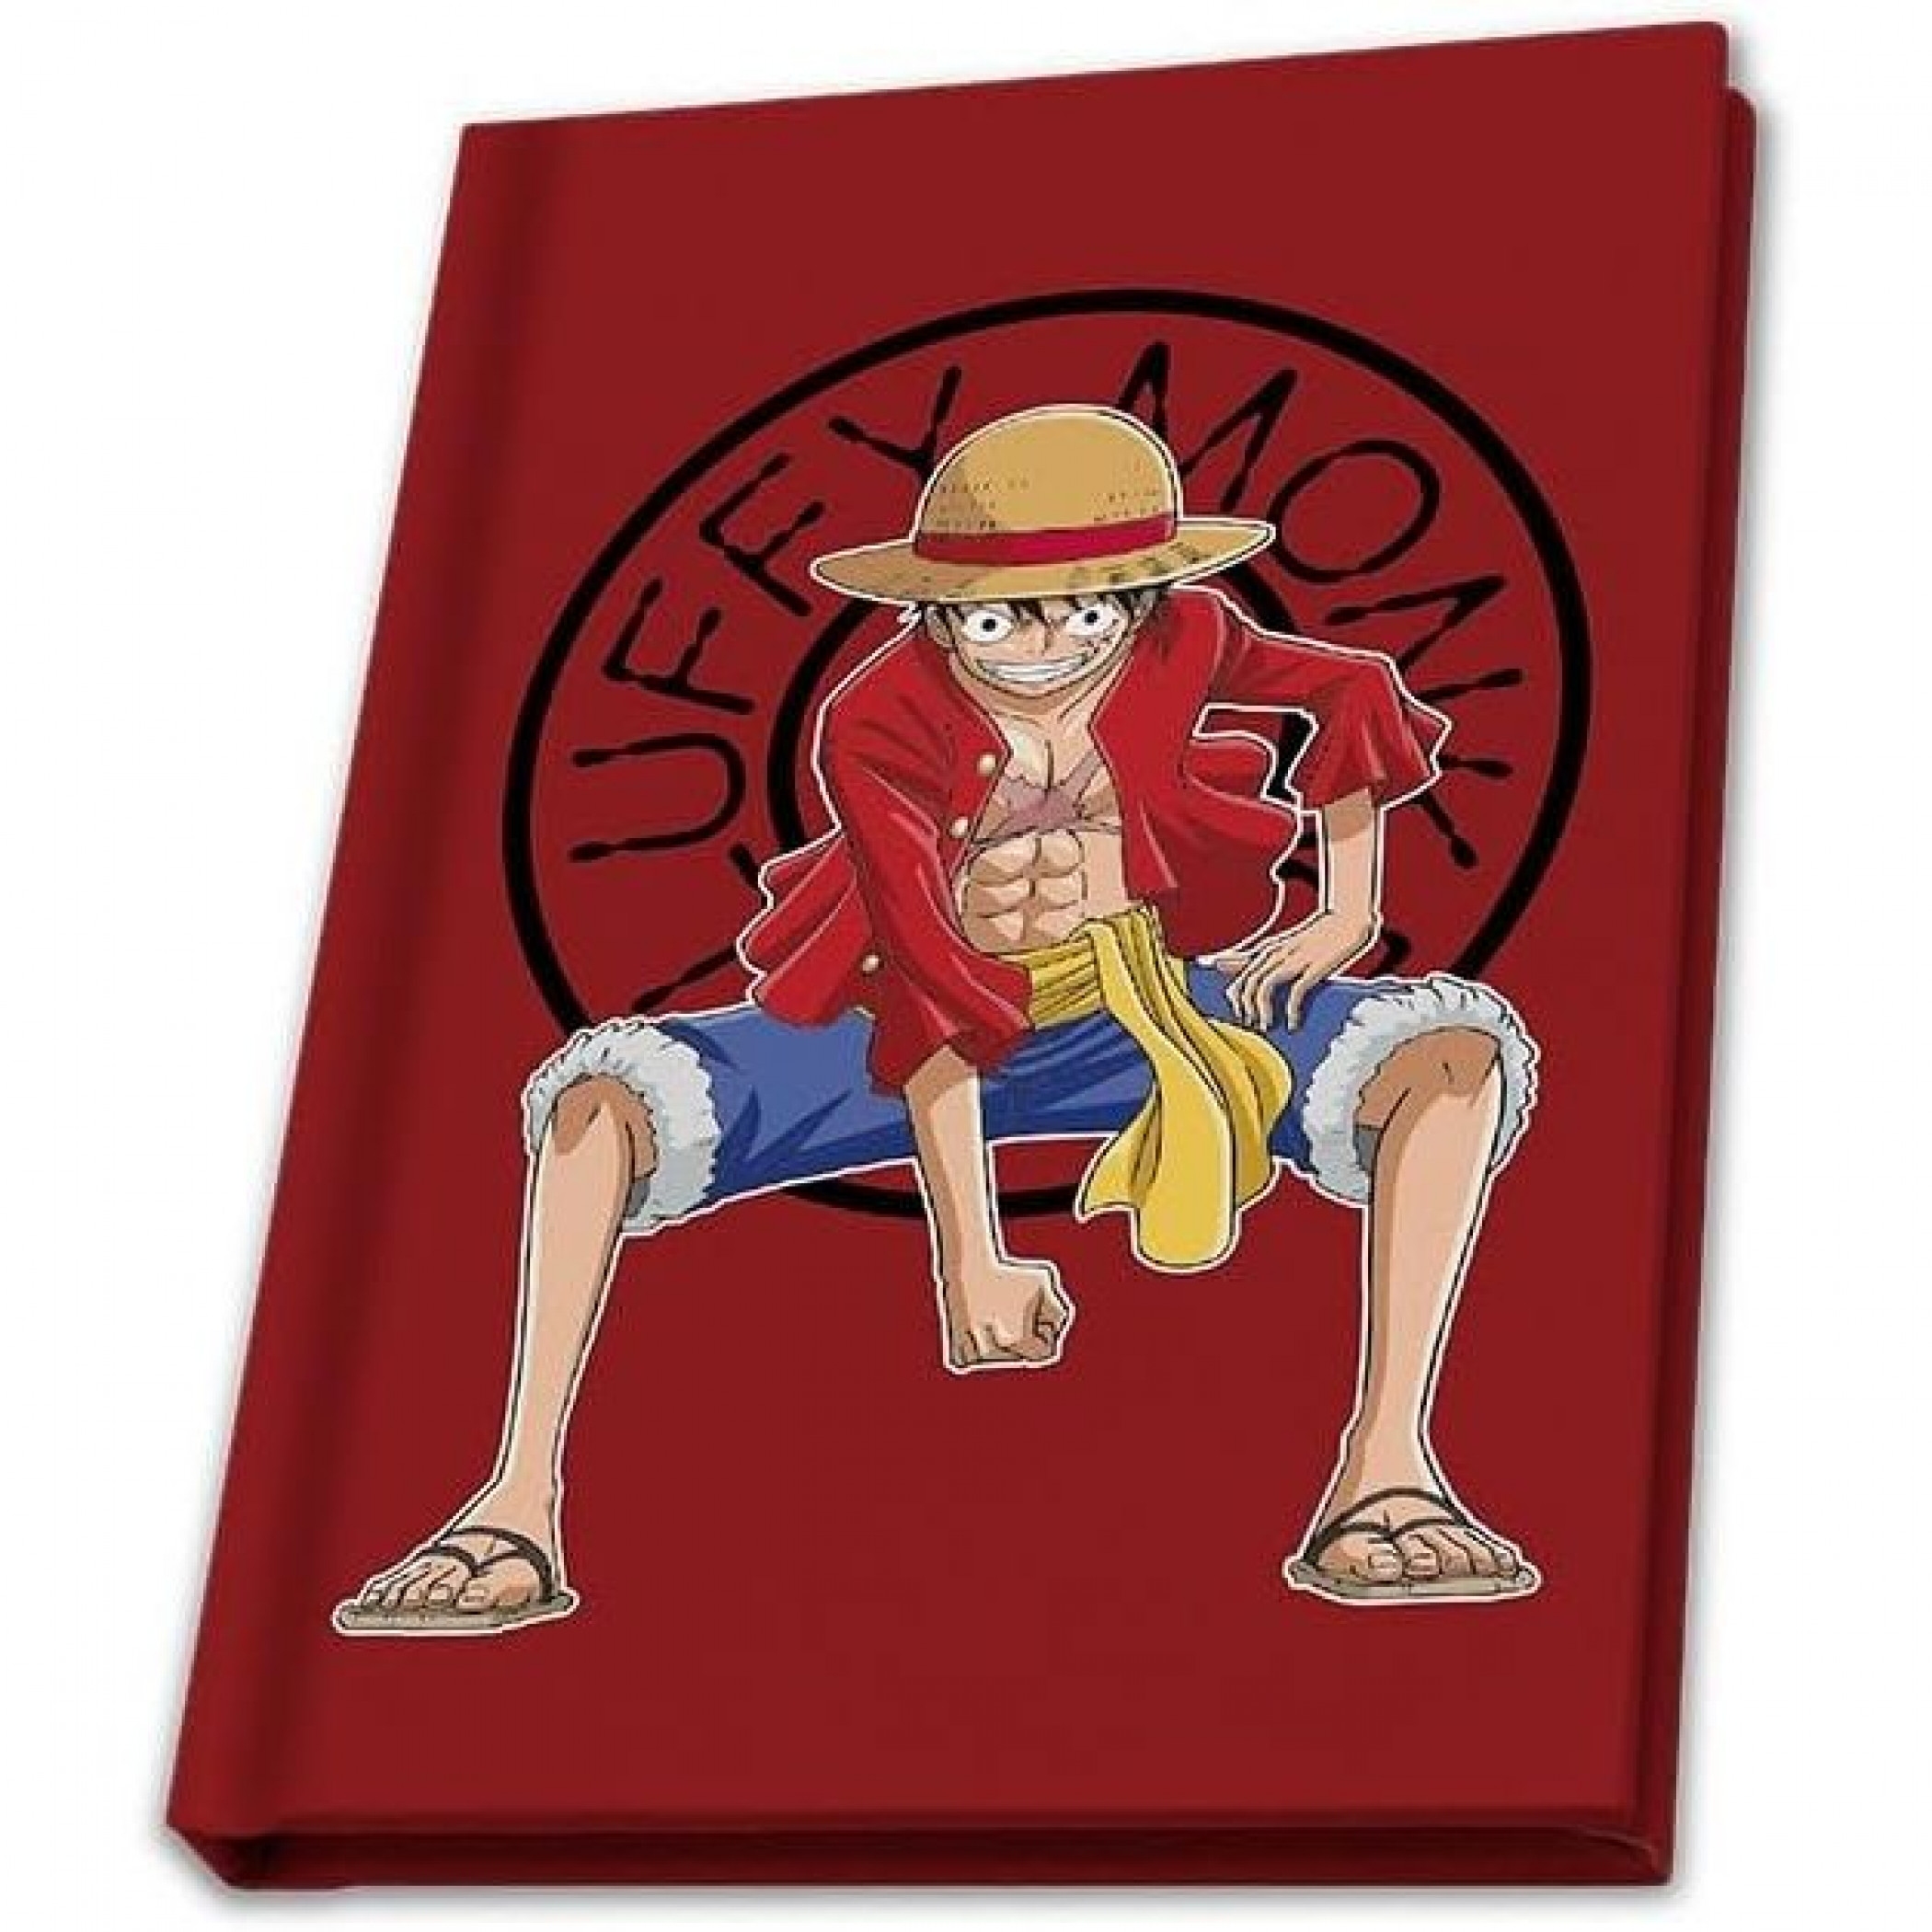 ONE PIECE - Luffy's Hat - Keychain 3D : : Keyring ABYstyle One  Piece